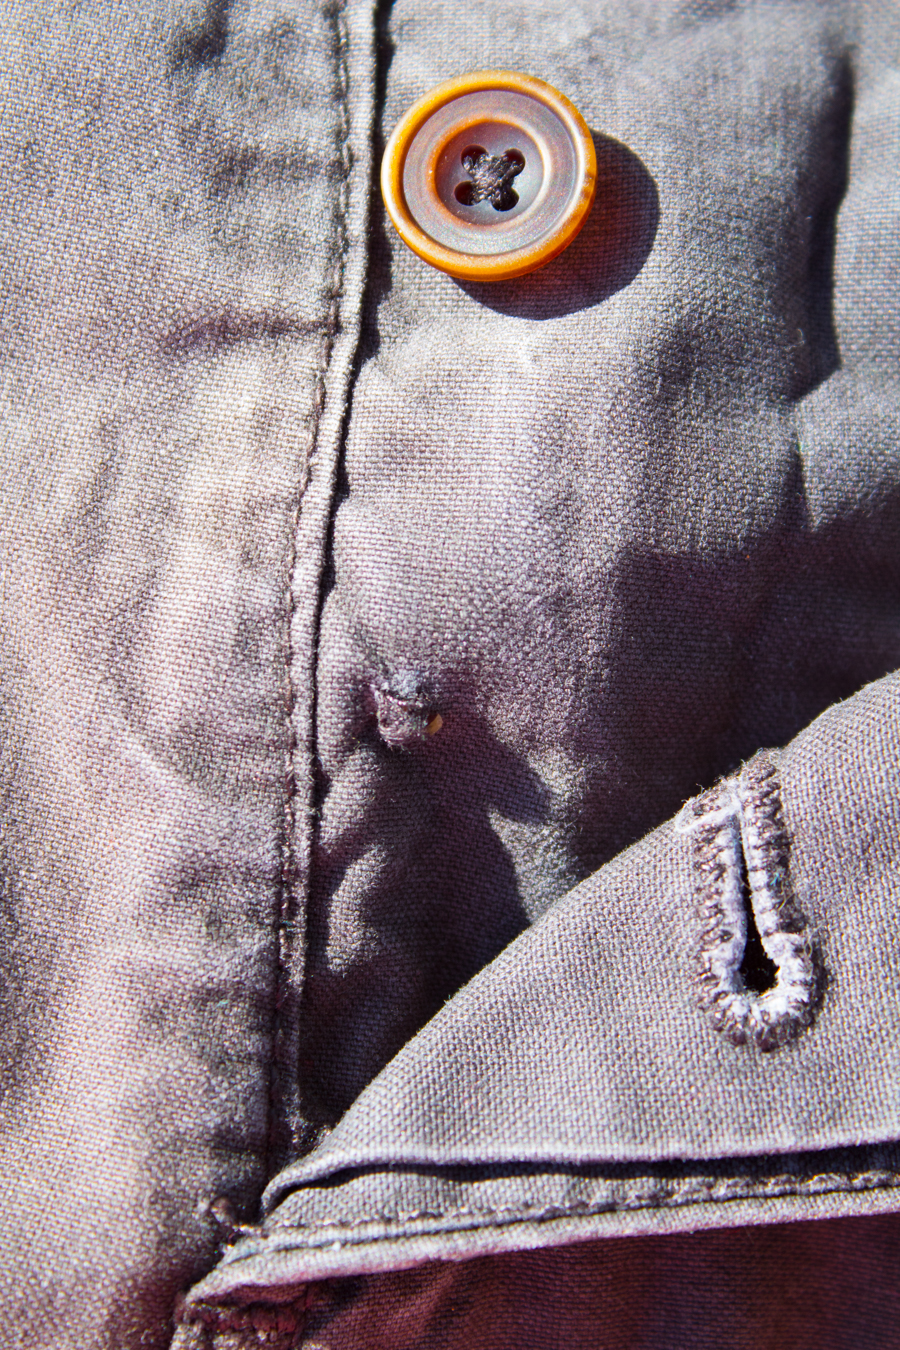 How to Sew a Button Back on Your Jeans